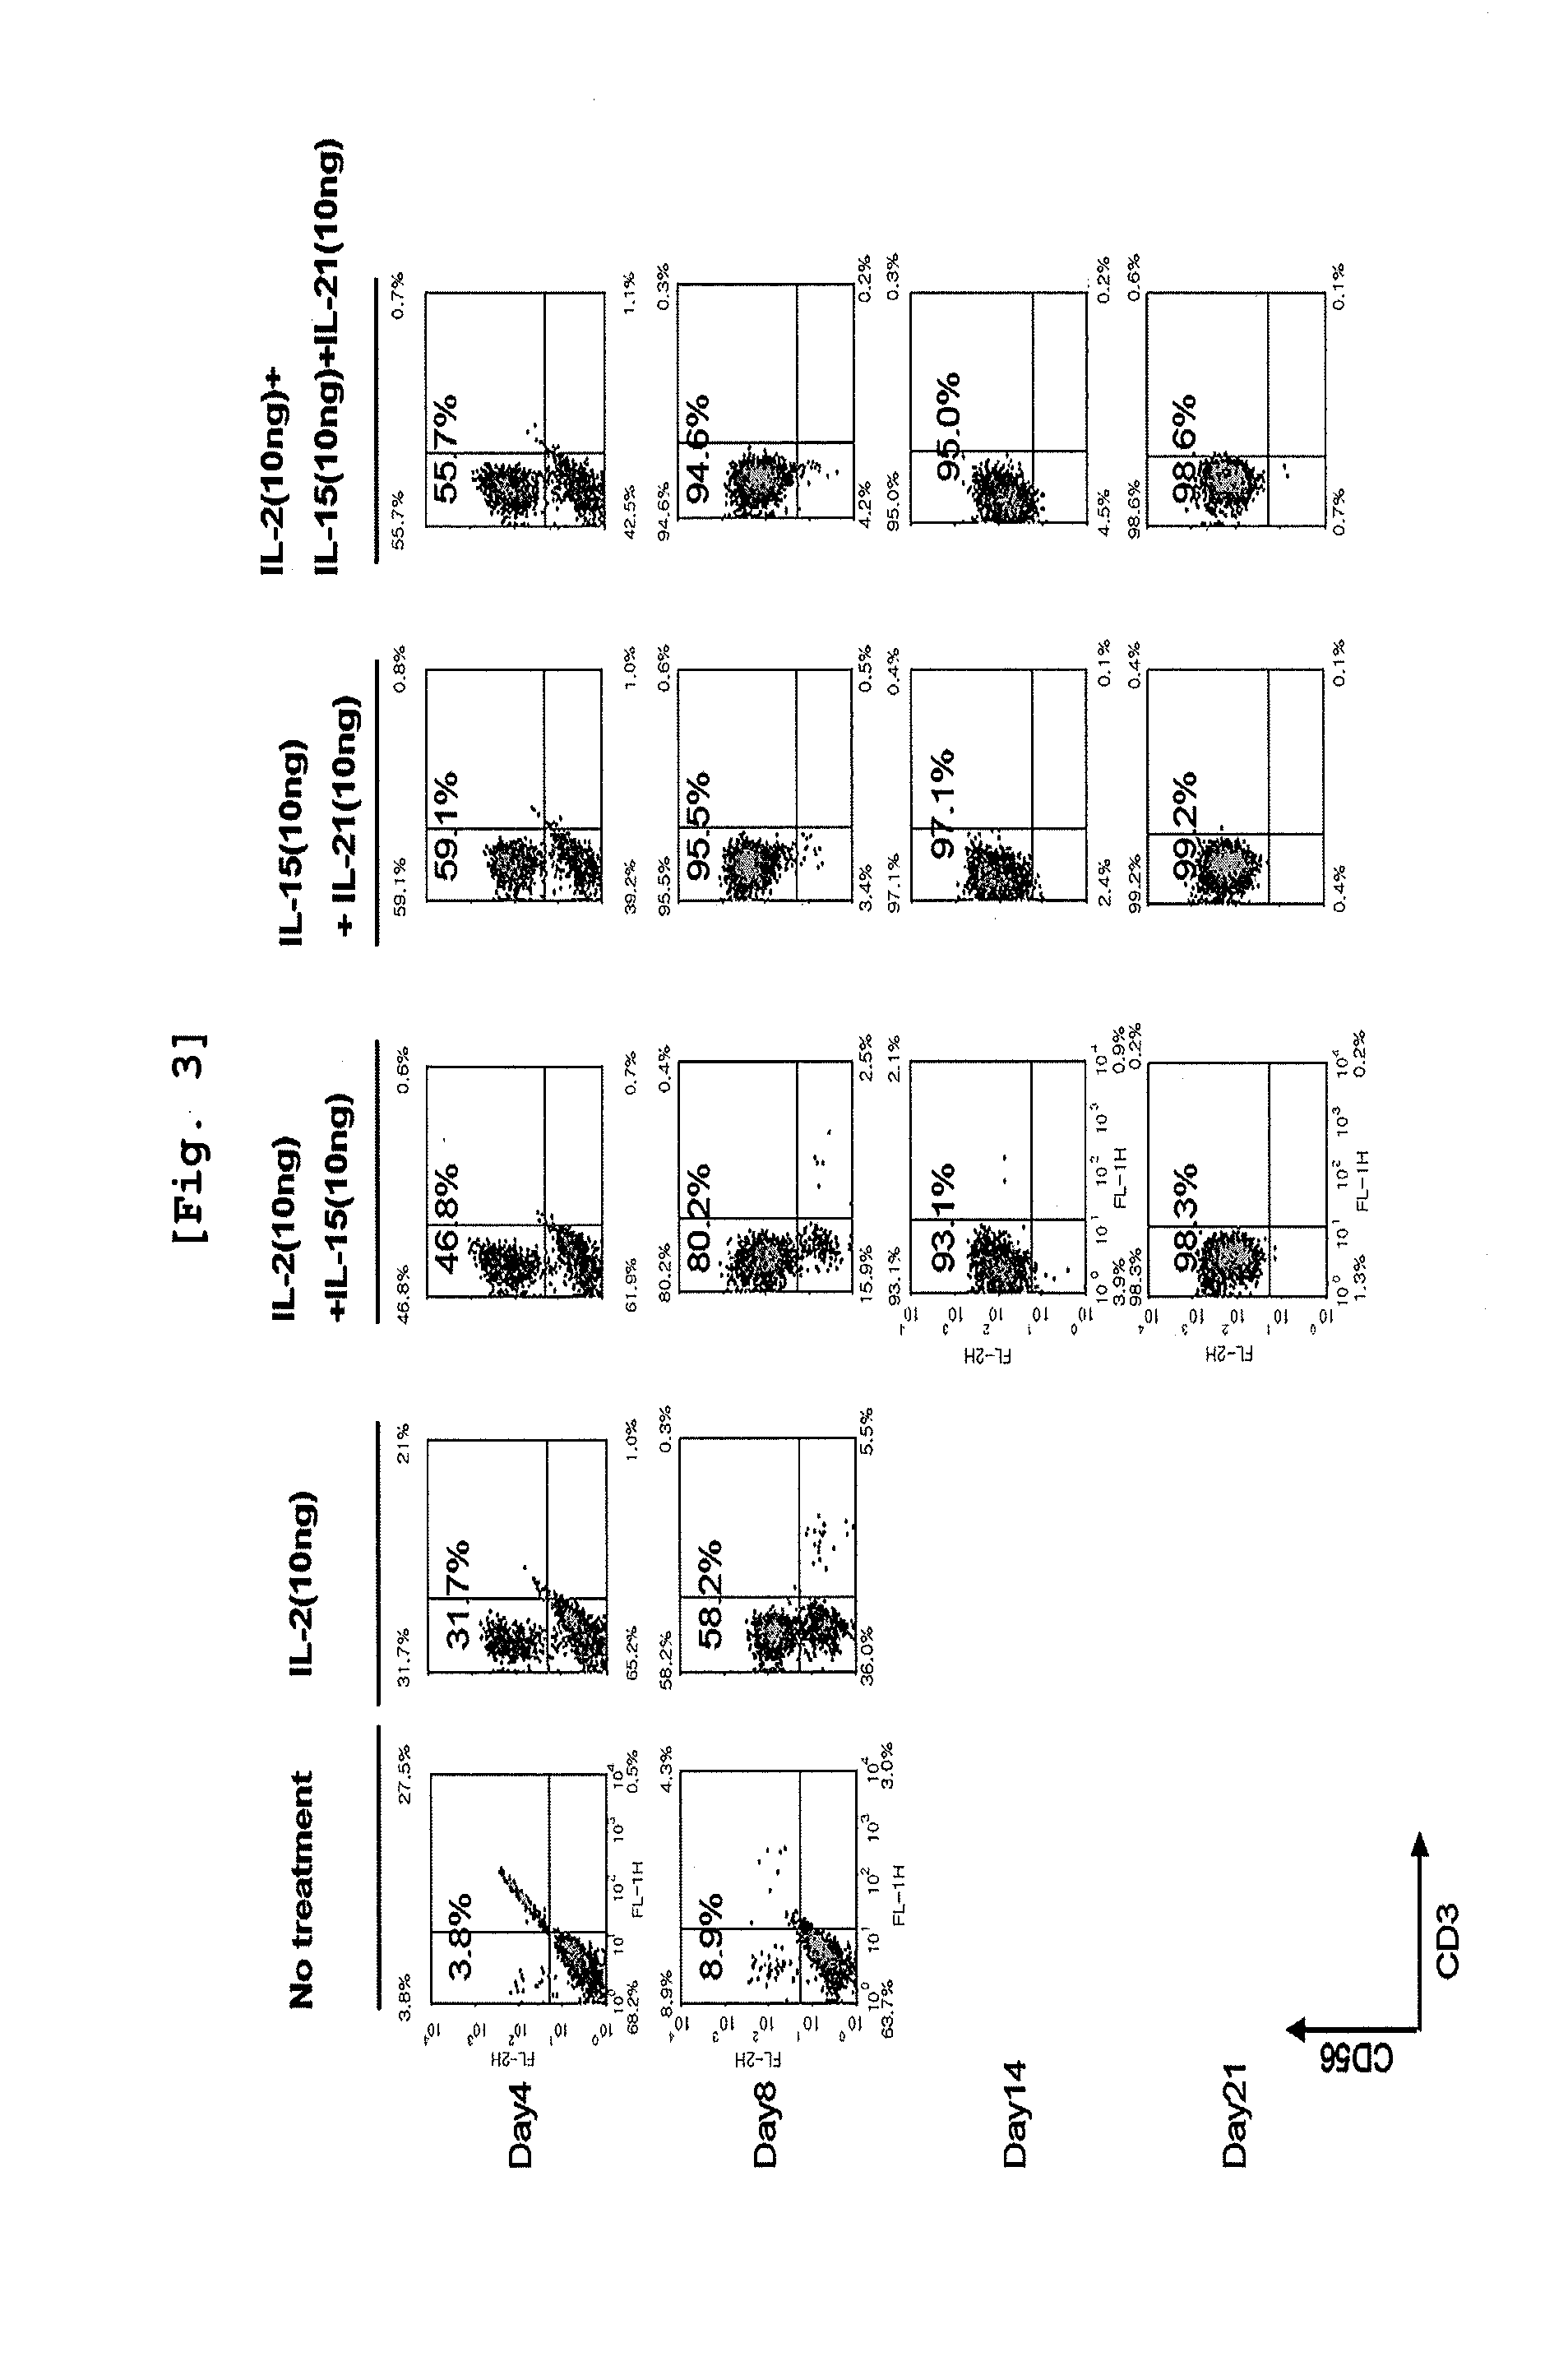 Method for Efficiently Proliferating and Differentiating Natural Killer Cells from Umbilical Cord Blood